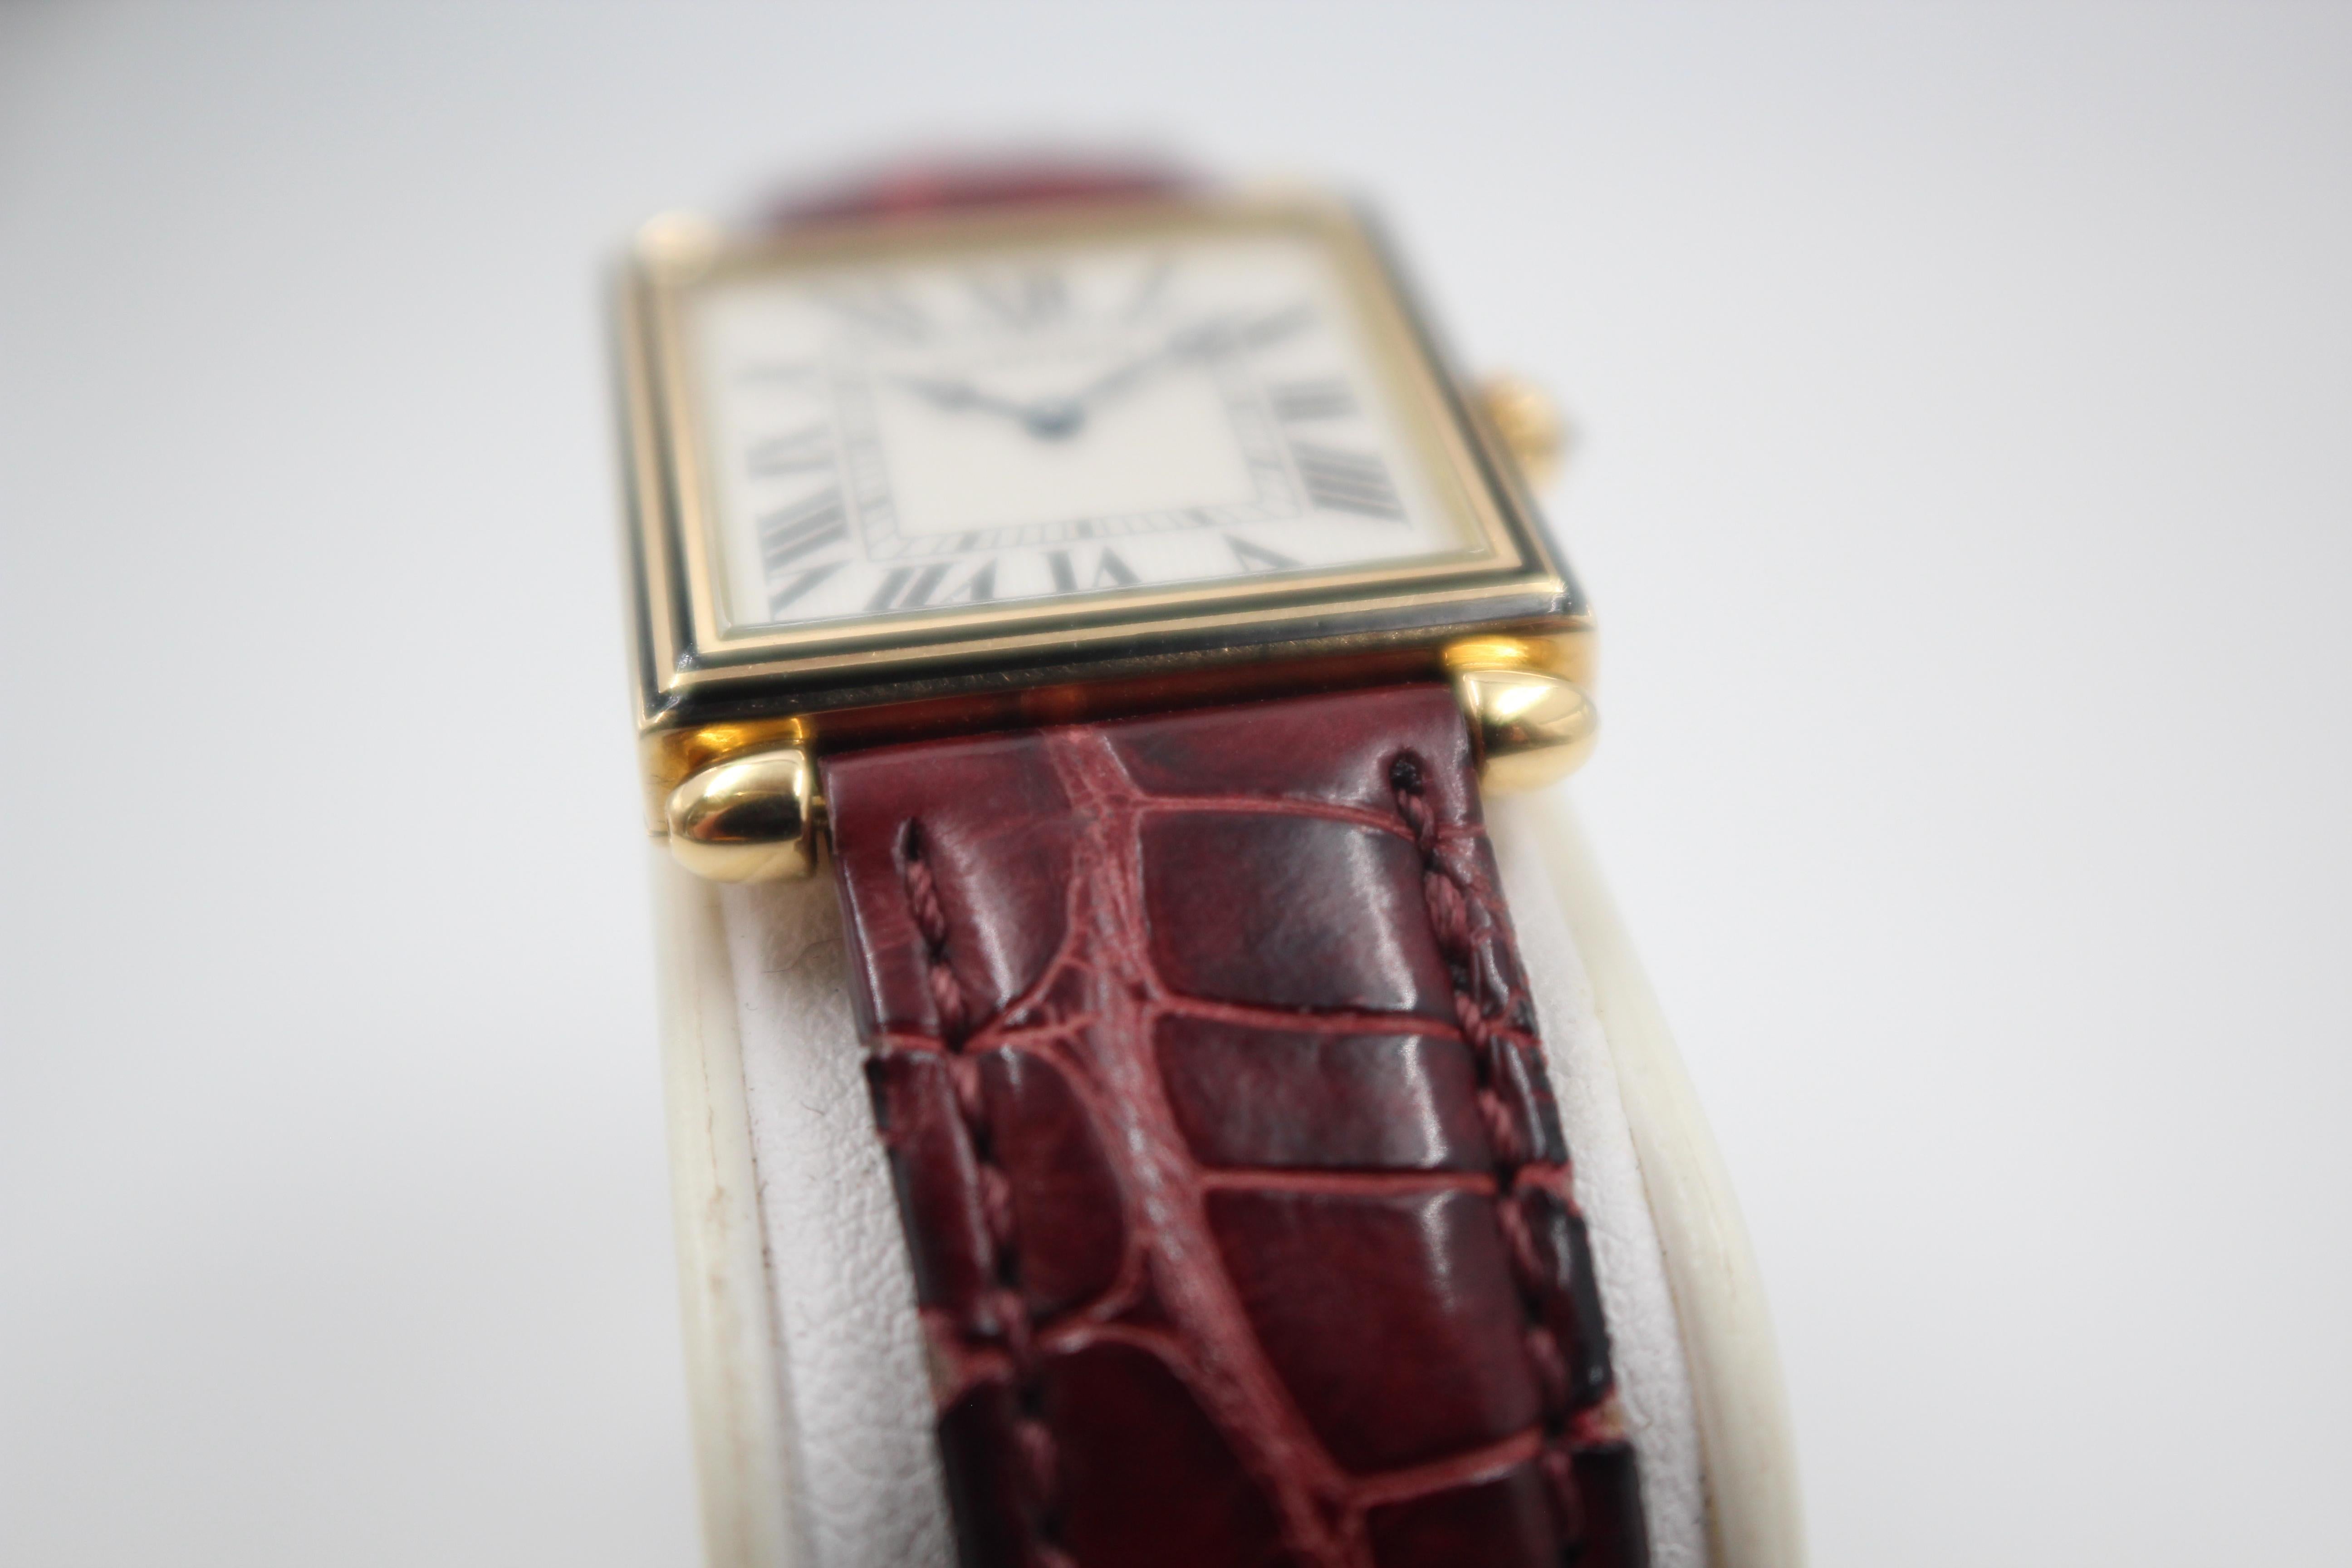 Pre-Owned 1990s Cartier Obus Carree, watch in 18K yellow gold with an enamel ring and white dial. Case measures 24mm, Cartier quartz movement. Original Cartier strap with a Panthere style clasp, ADB Strap measures 8